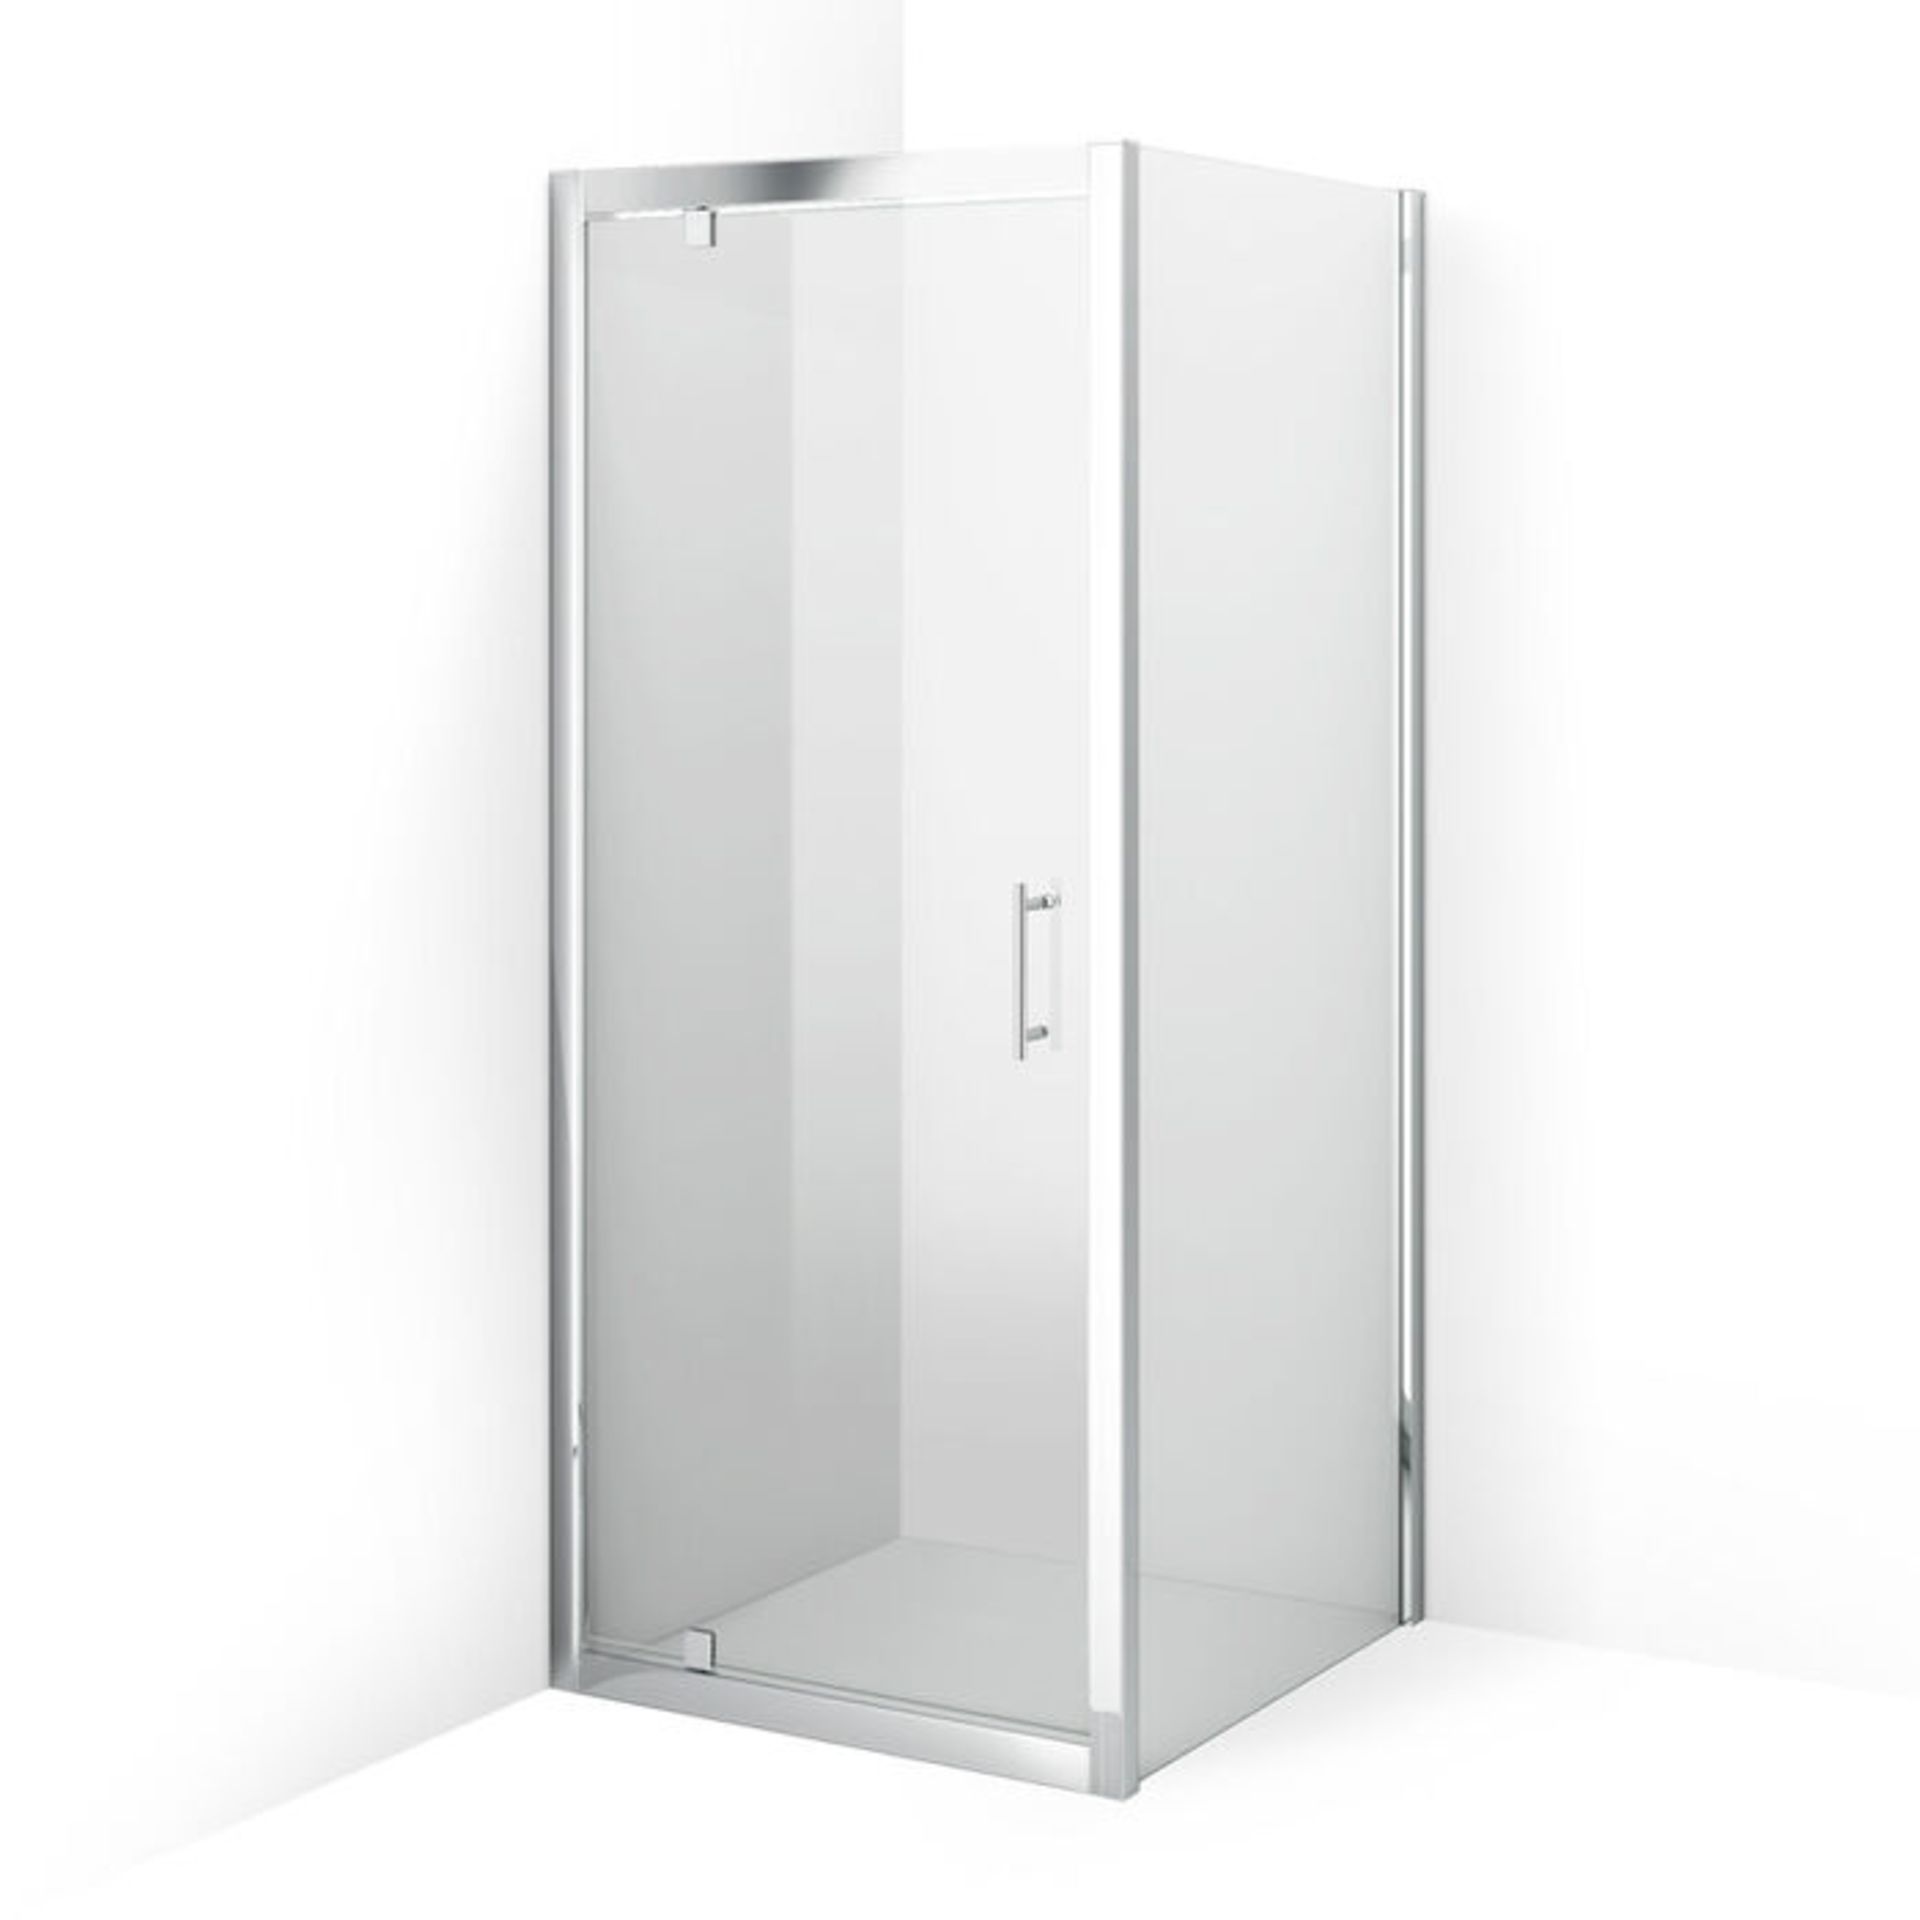 (G43) 800x800mm - 6mm - Elements Pivot Door Shower Enclosure. RRP £330.99. 6mm Safety Glass F... - Image 4 of 4